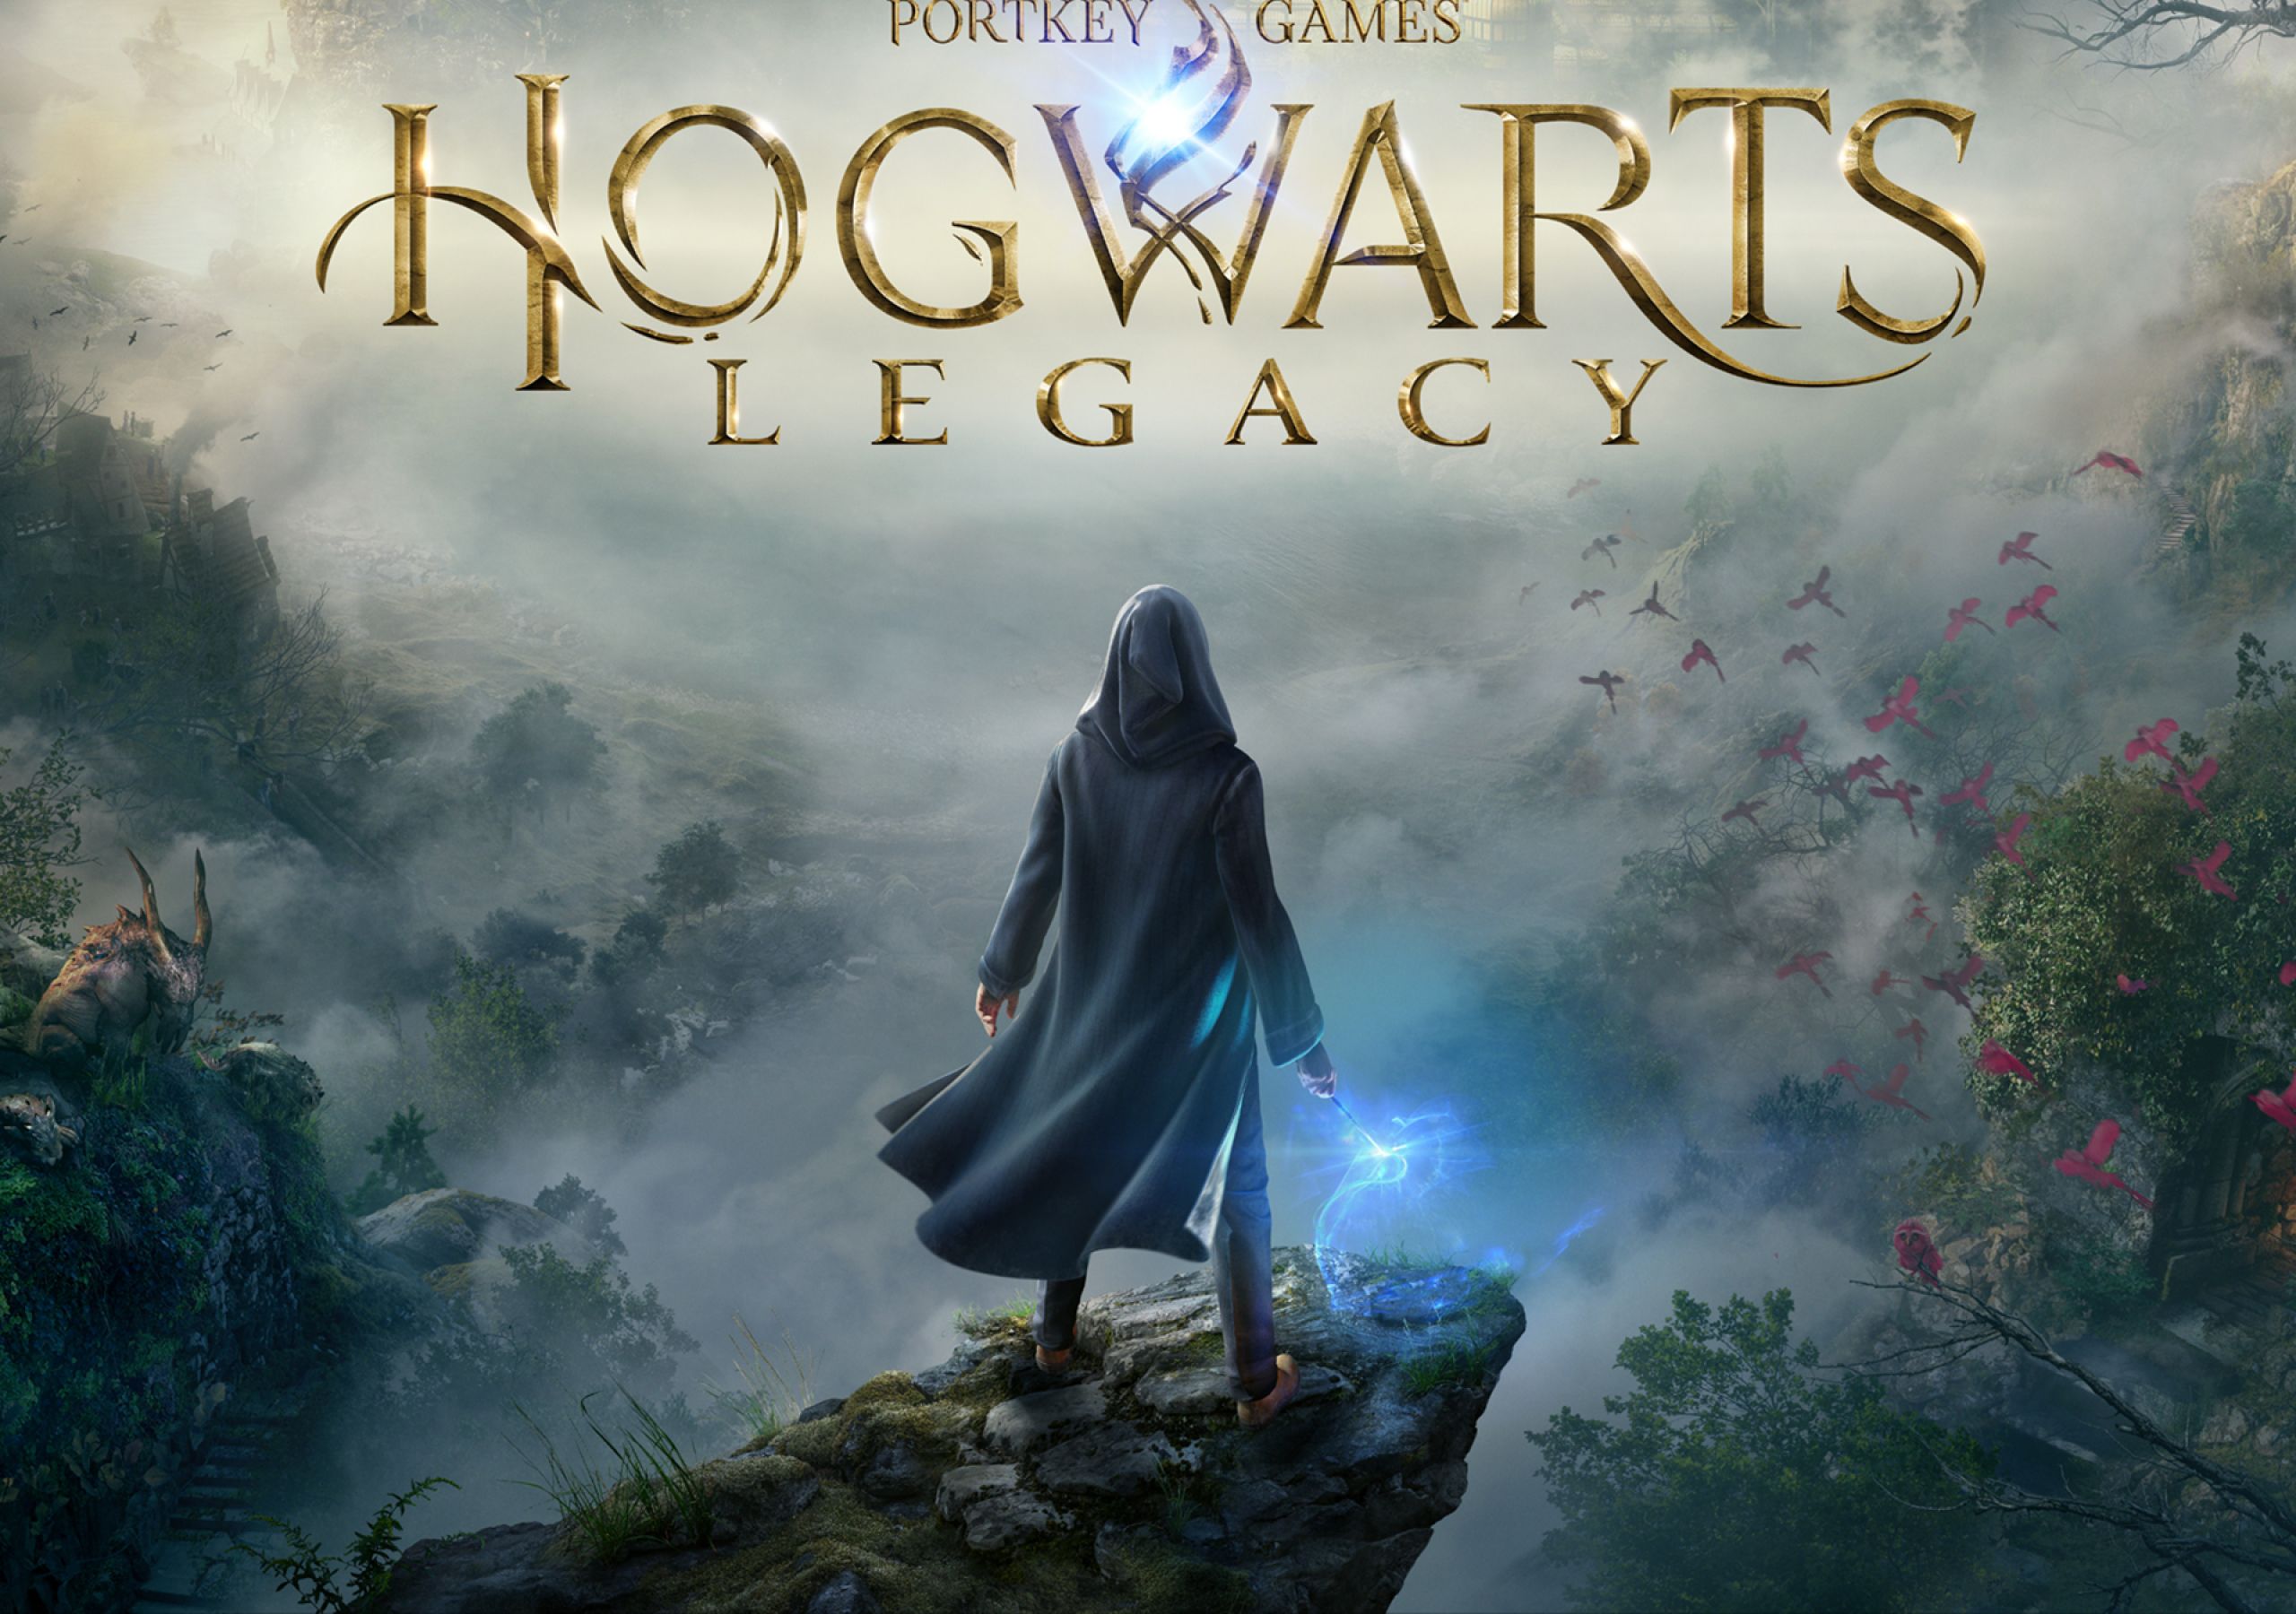 Hogwarts Legacy Poster 2560x1800 Resolution Wallpaper, HD Games 4K Wallpaper, Image, Photo and Background